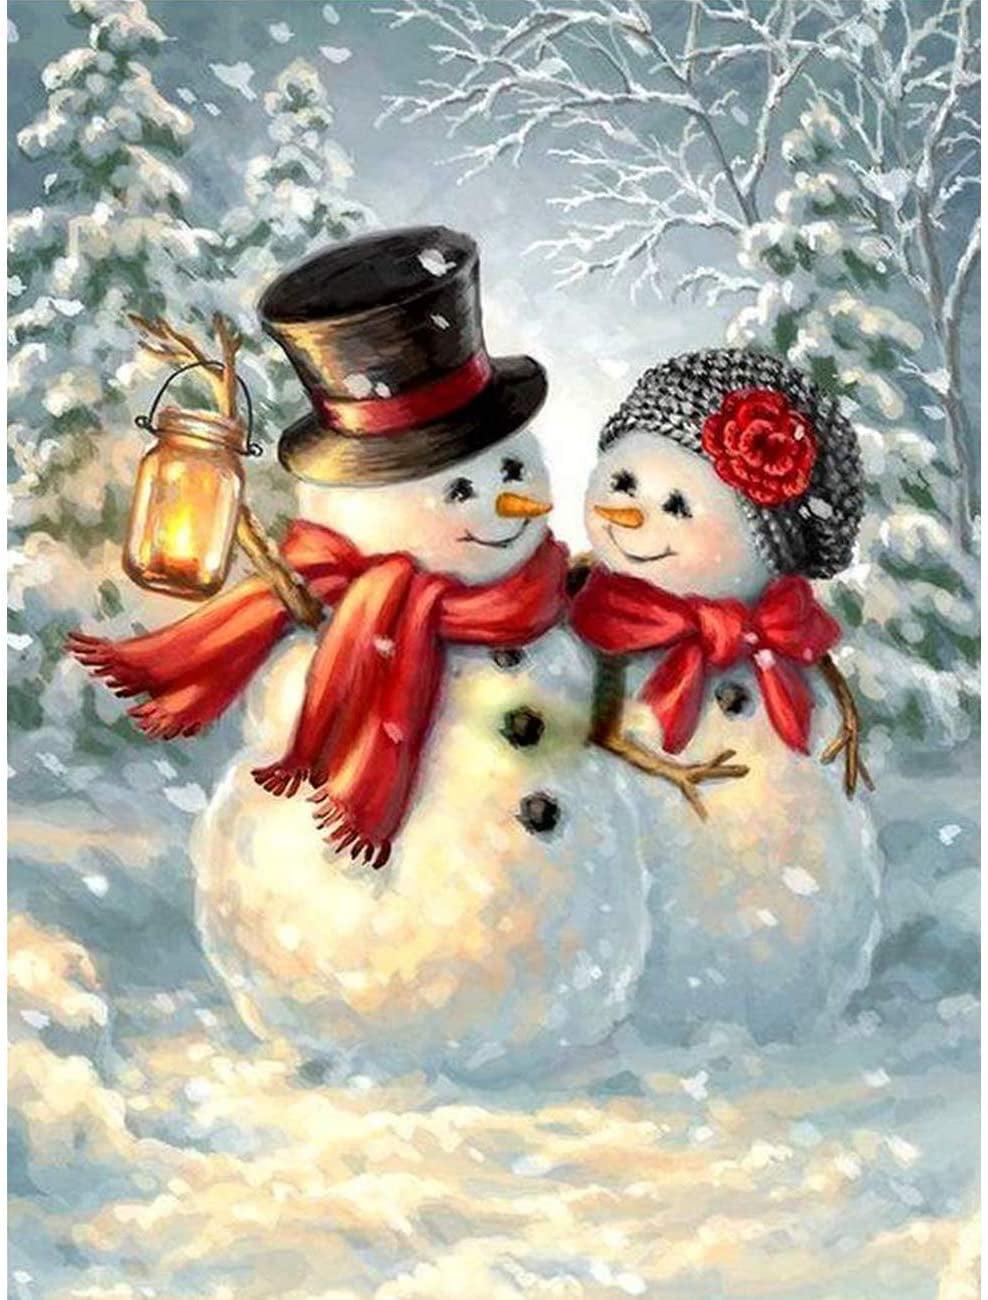 5D DIY Diamond Painting Kits Snowman Full Drill Rhinestone Embroidery Cross Stitch Painting for Christmas Home Decor 4 Pack 7.87 x 11.81 